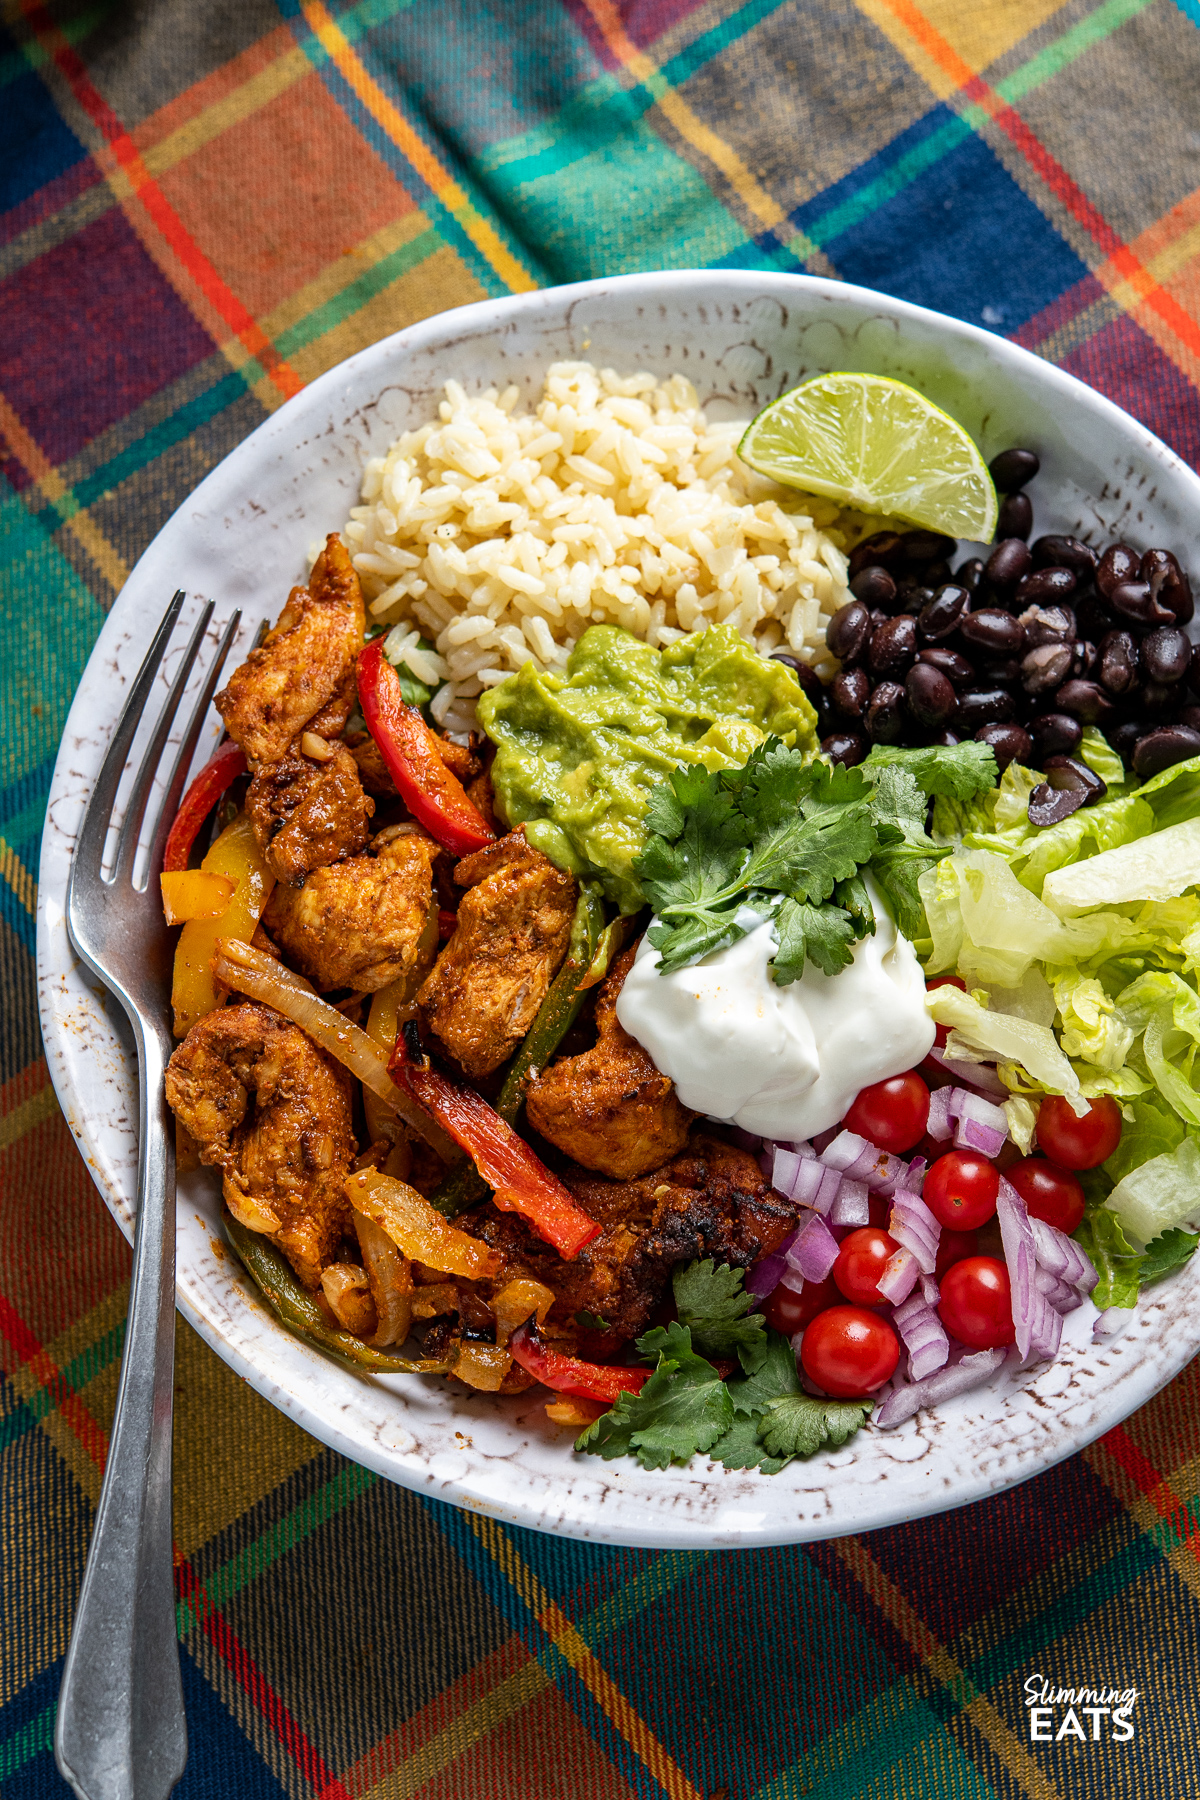 Chicken Fajita bowl with rice, lettuce, black beans, soured cream, guacamole, red onion and tomatoes.